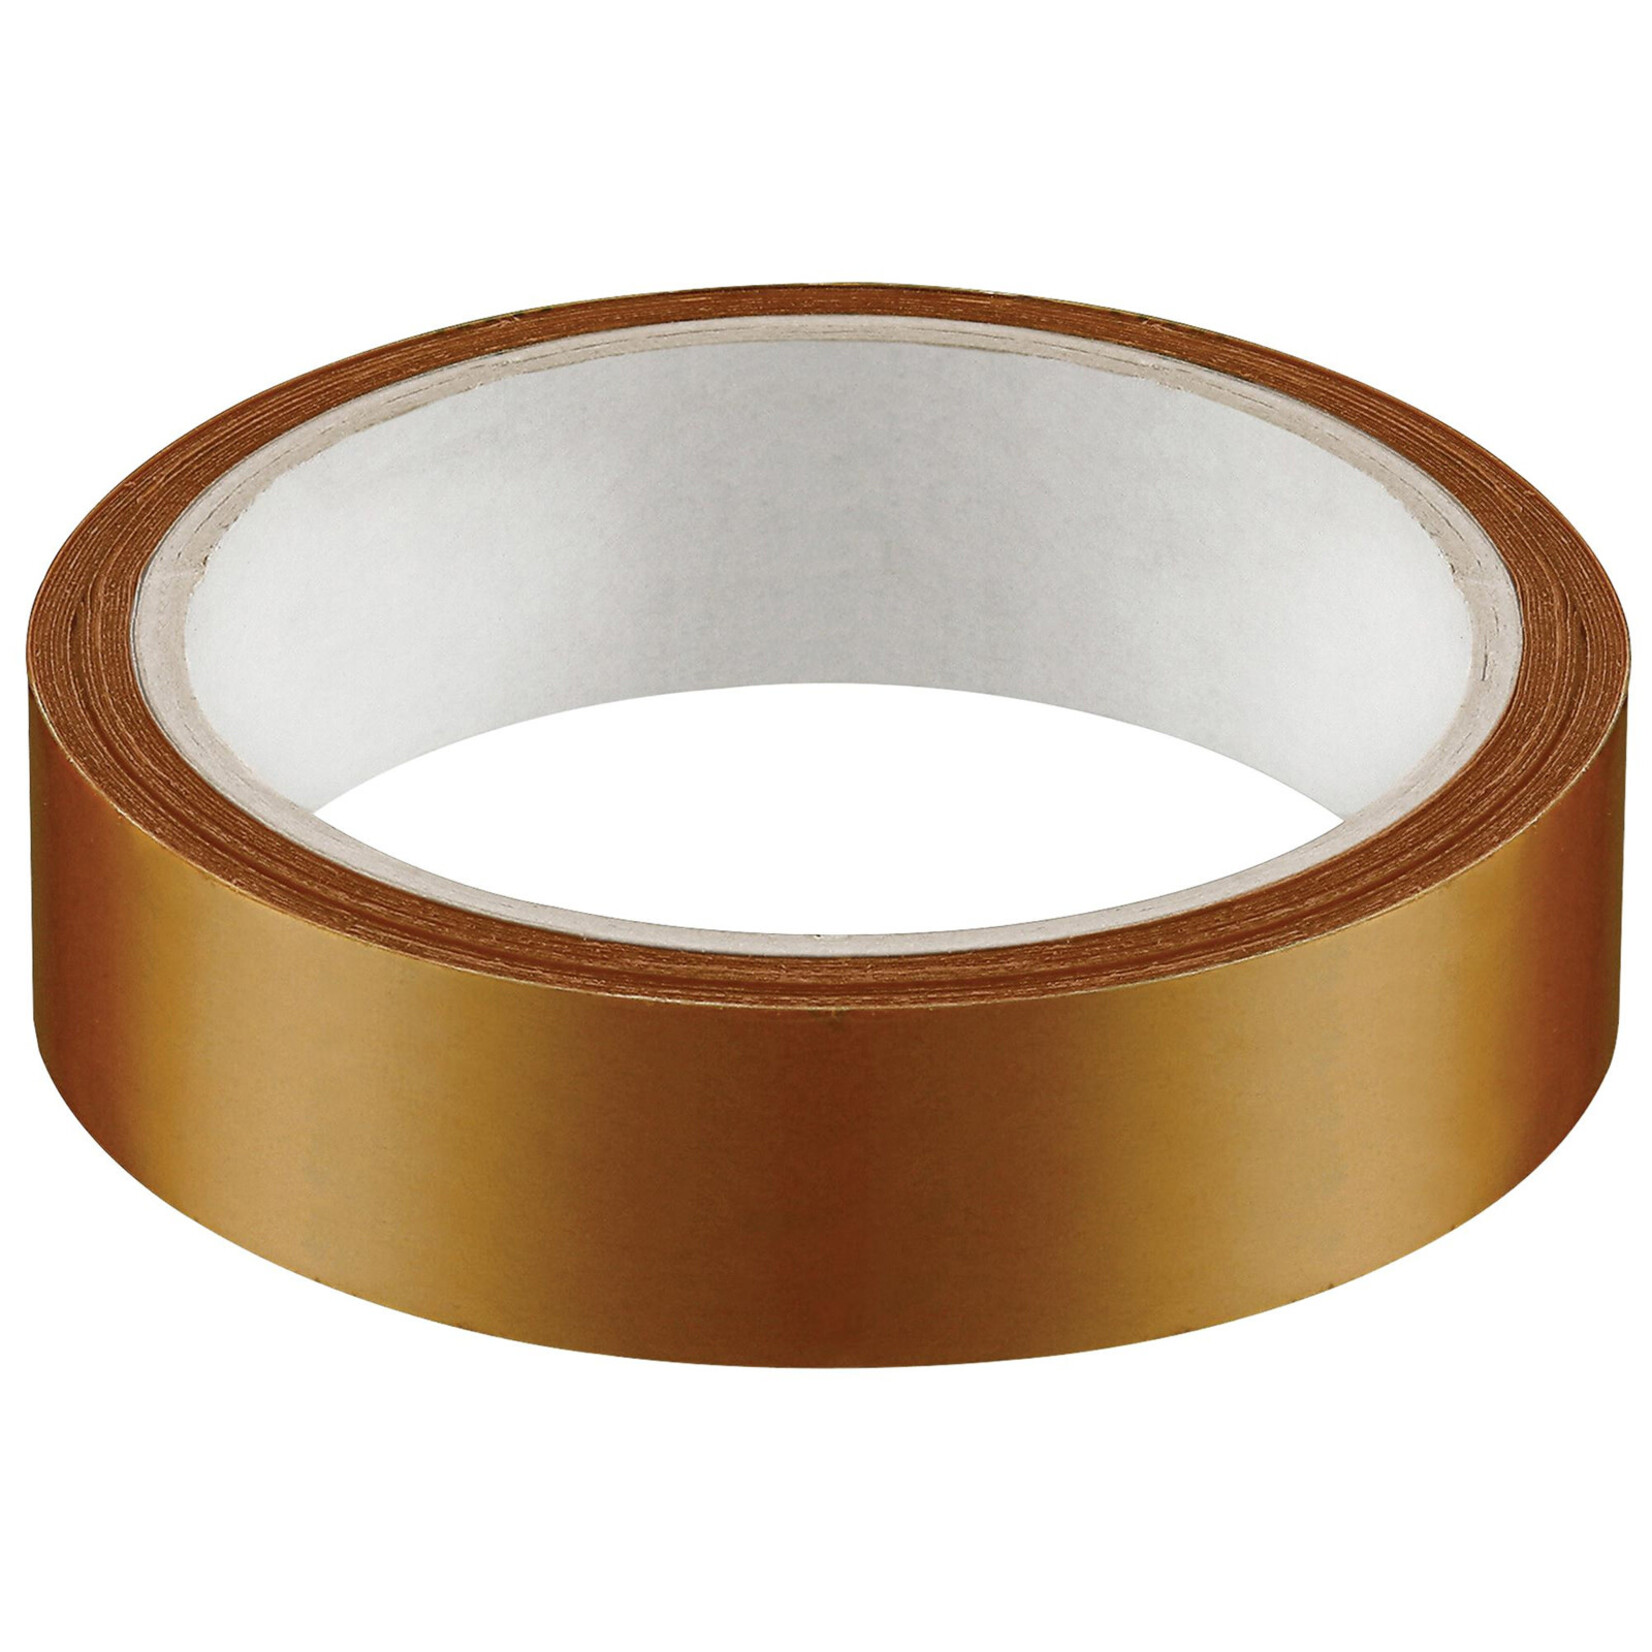 Giant Tubeless tape - 21mmx4.7m 21mmx4.7m